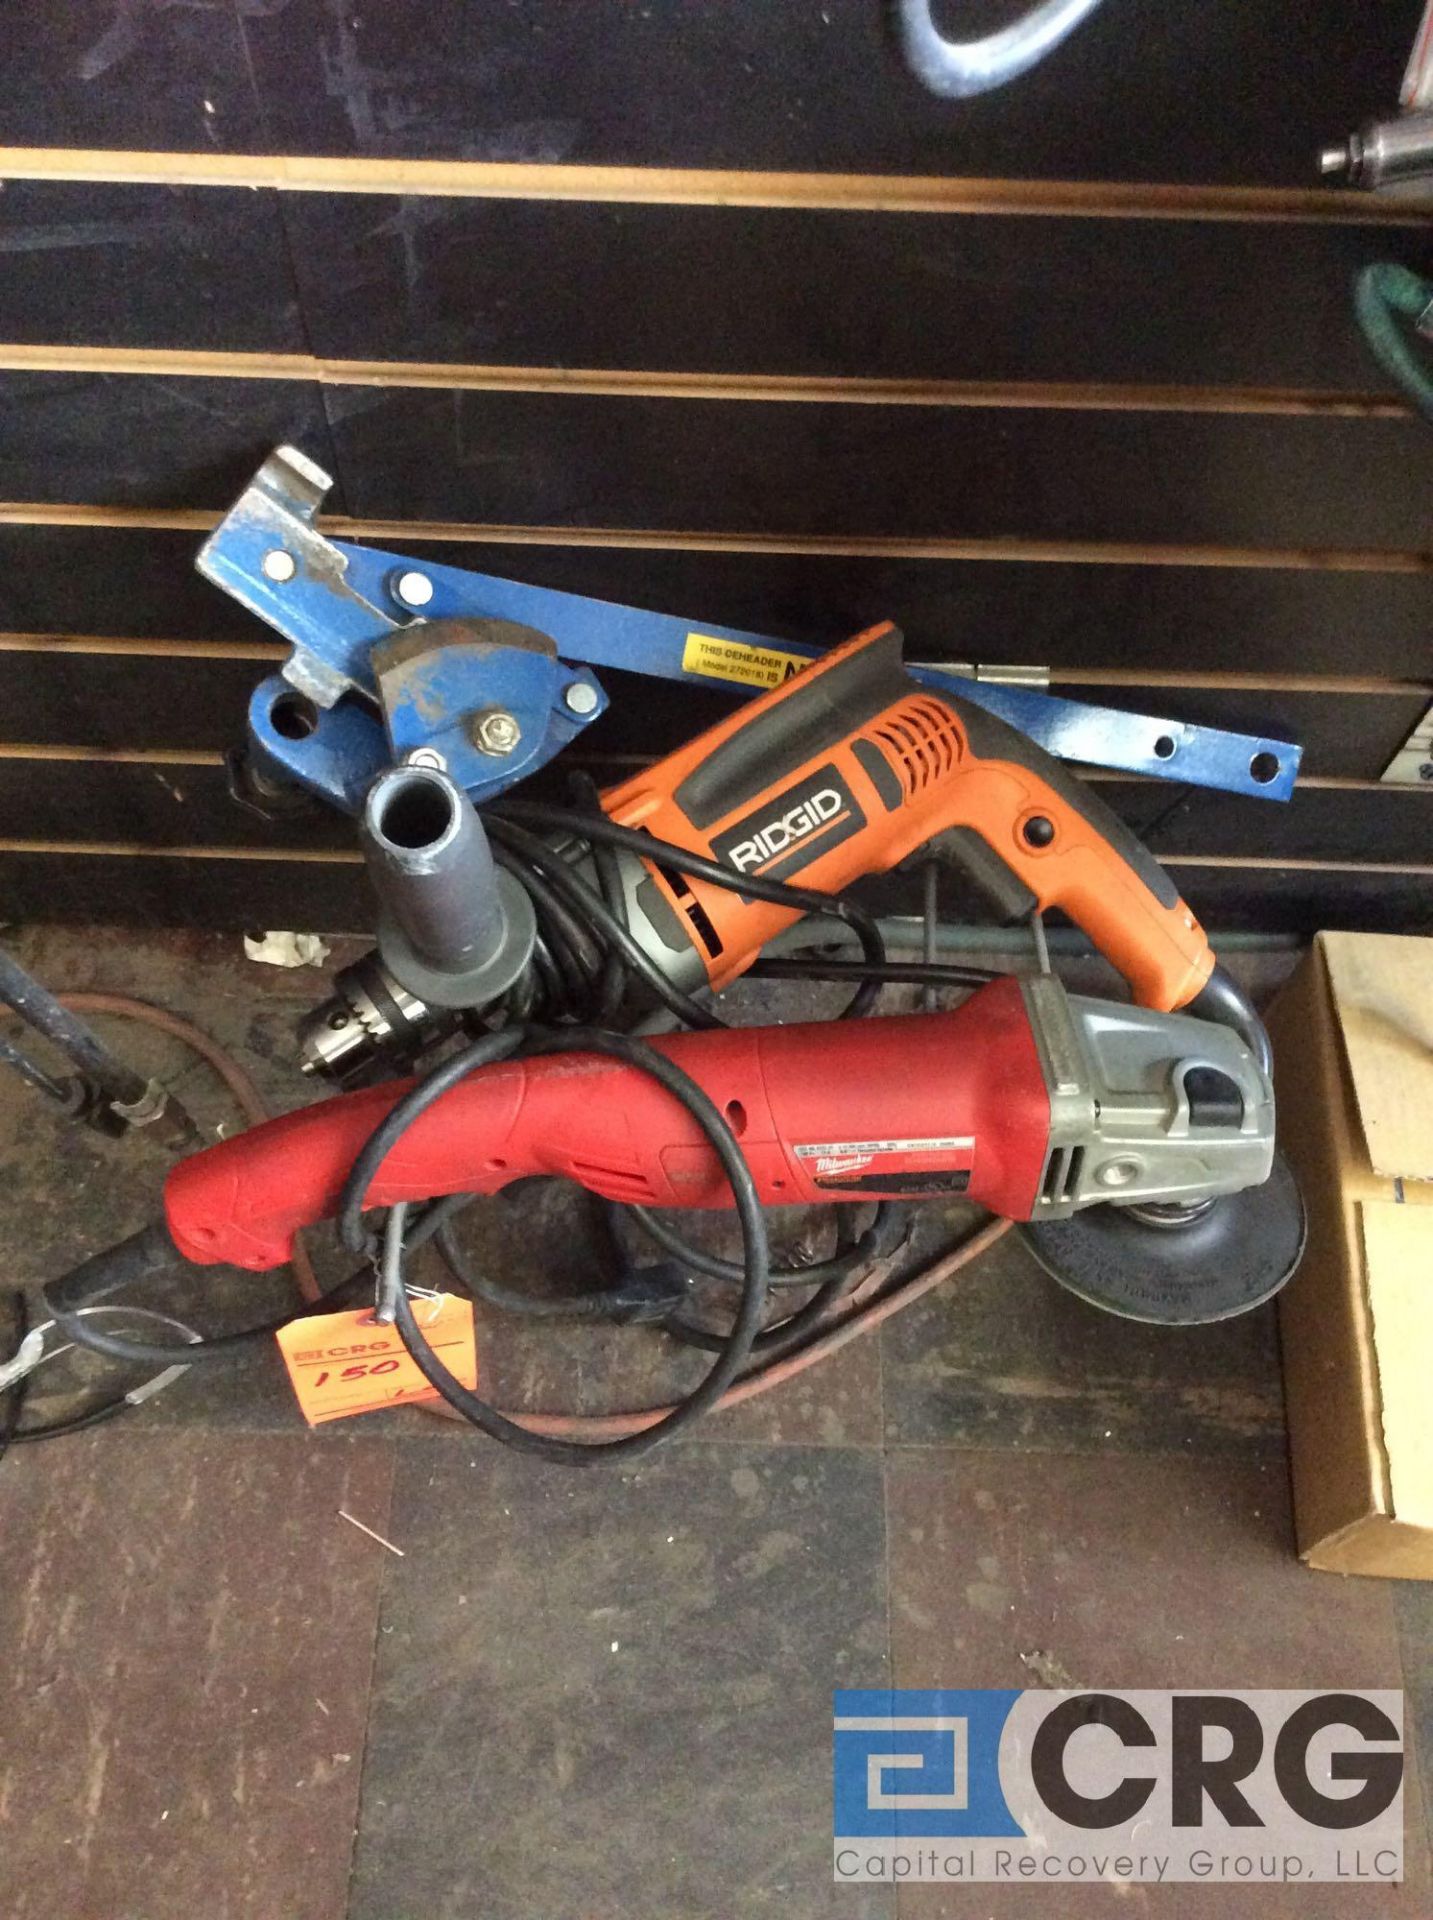 Lot including (1) Milwaukee 4 1/2 in. grinder m/n 6121-31, (1) rigid m/n R7111 corded 1/2 in. chuck, - Image 2 of 2